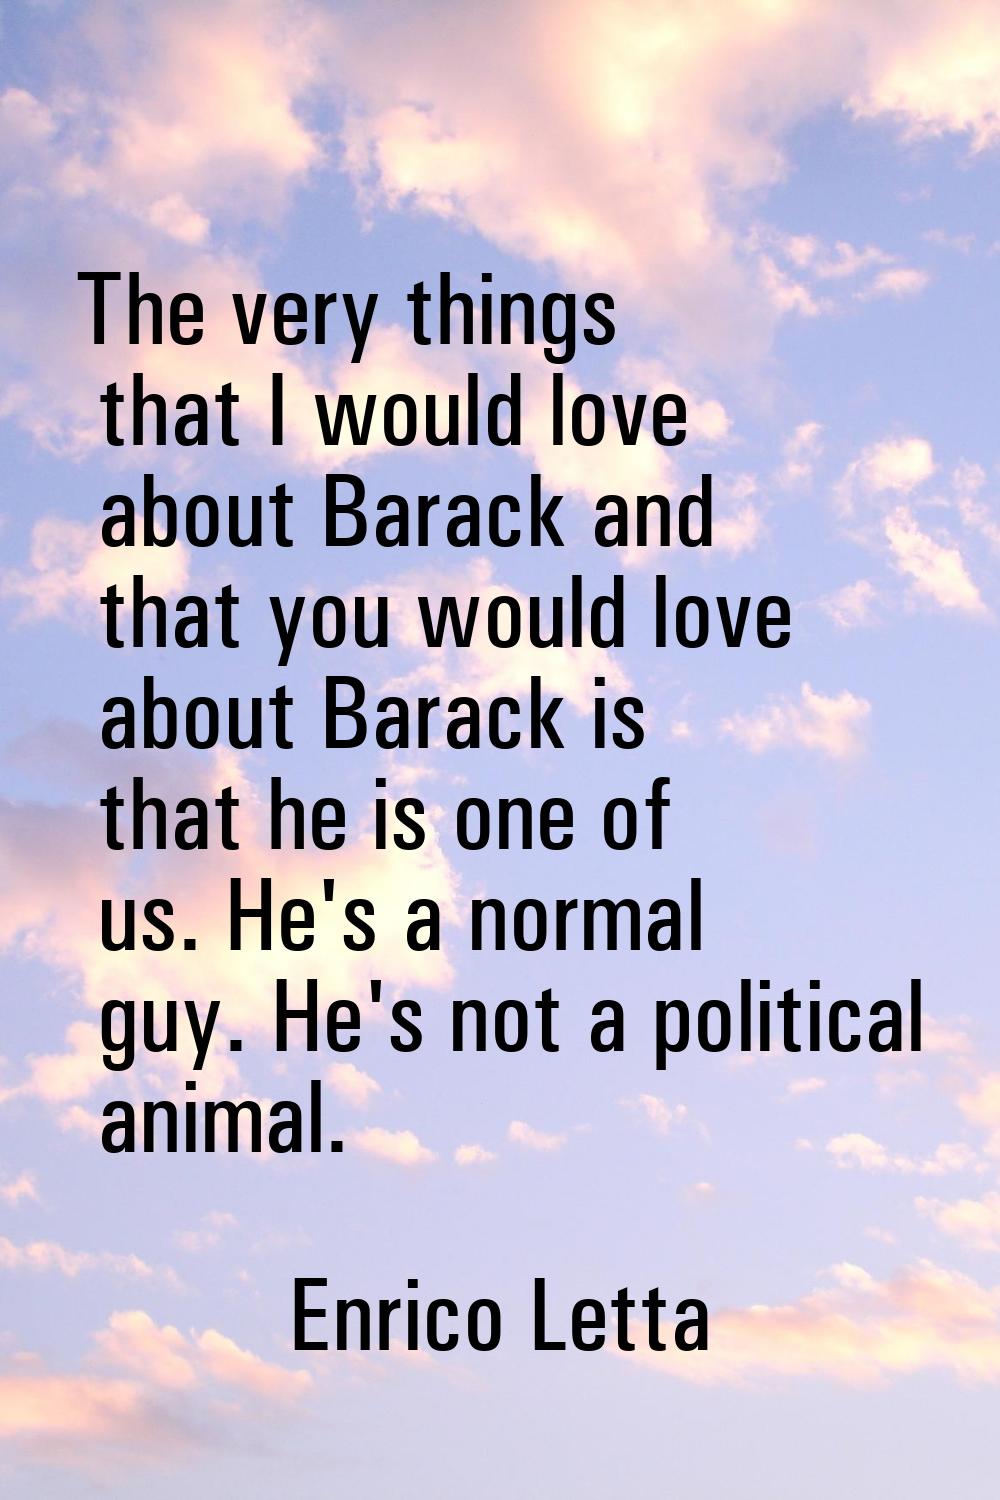 The very things that I would love about Barack and that you would love about Barack is that he is o